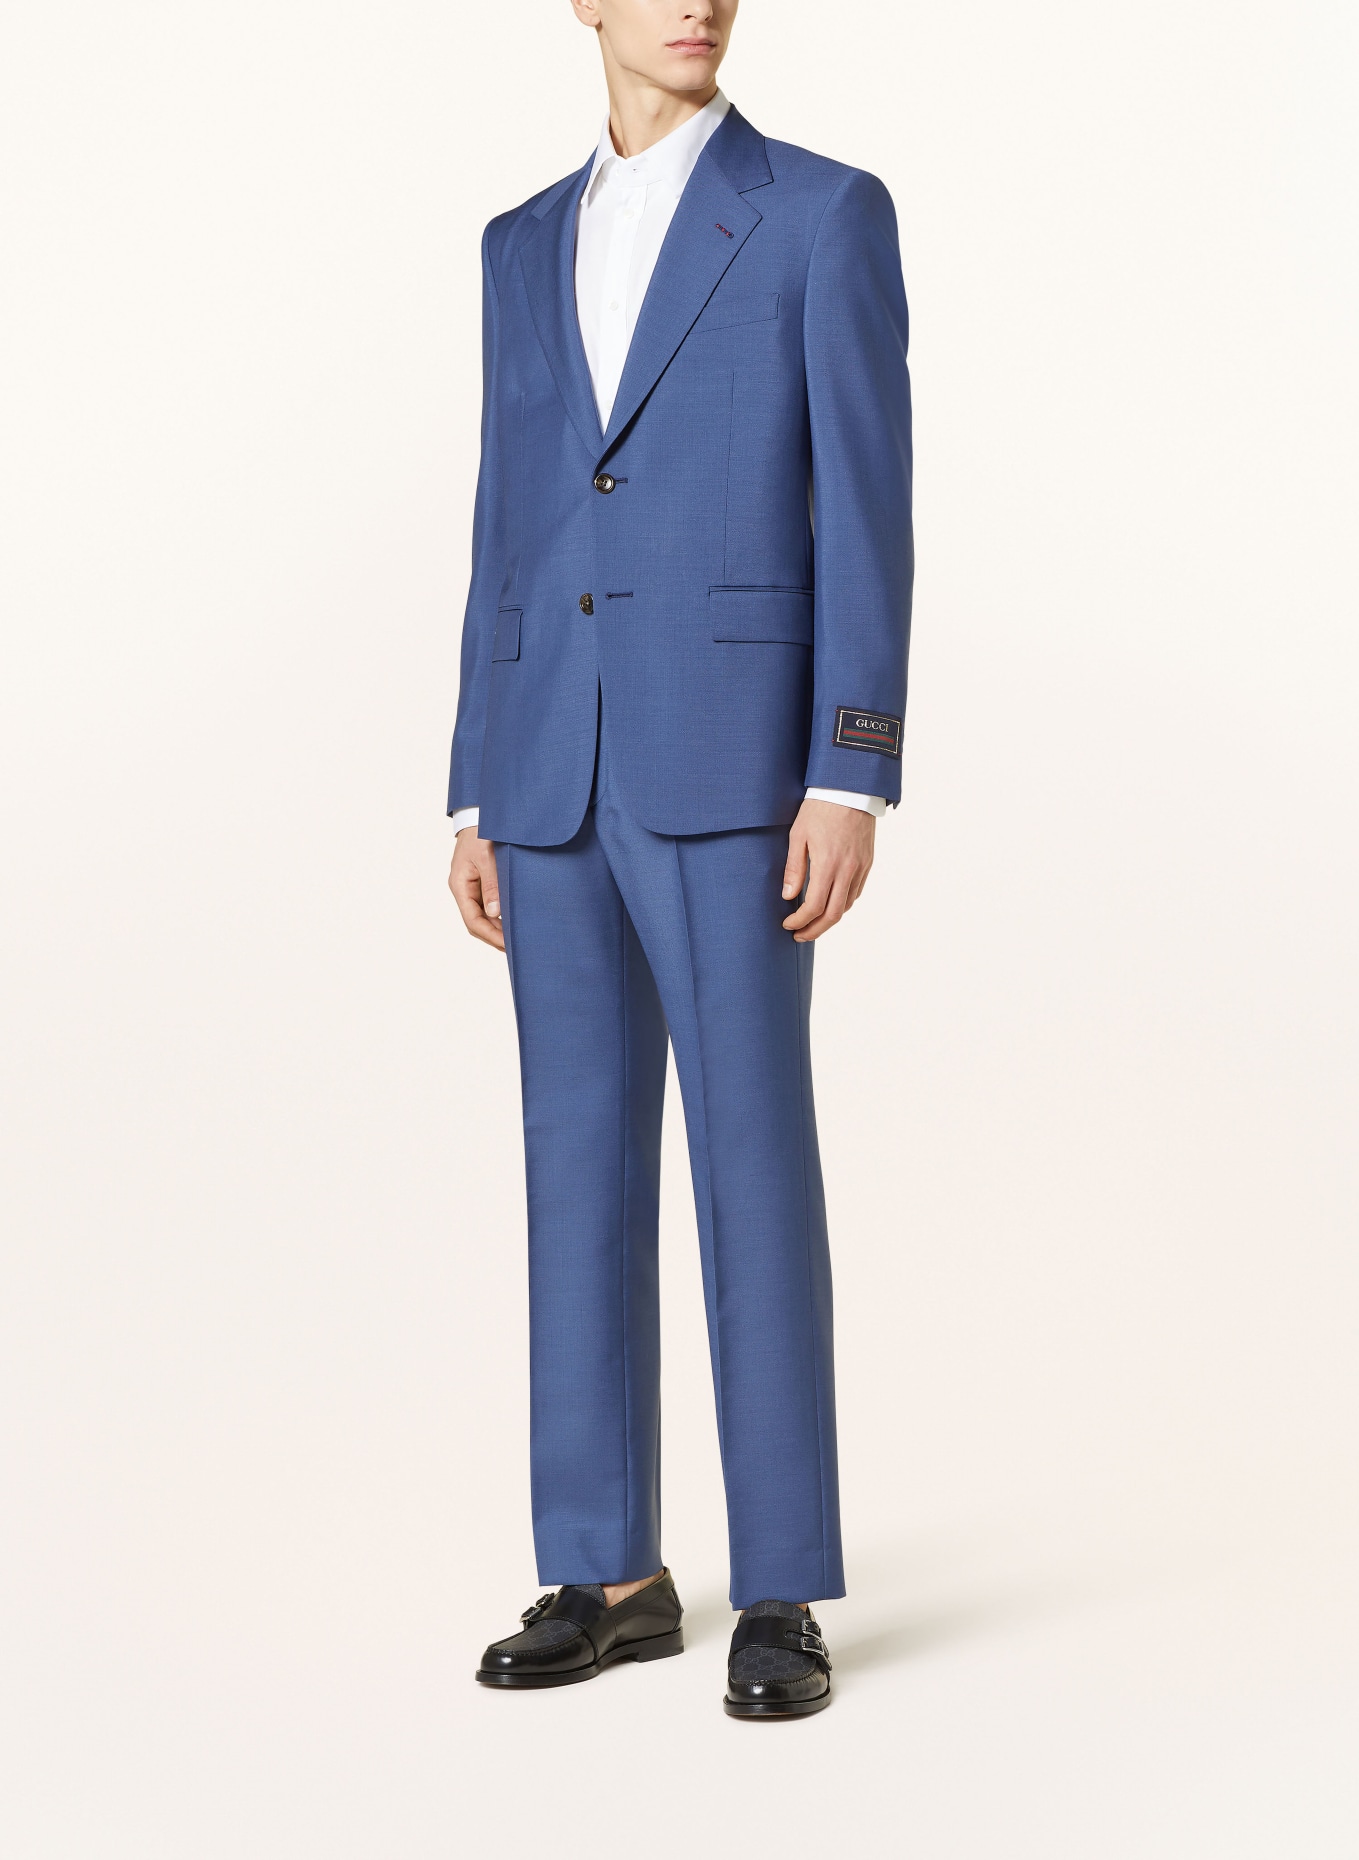 TOM FORD Slim-Fit Mohair And Viscose Dress Pants, Dress Pants